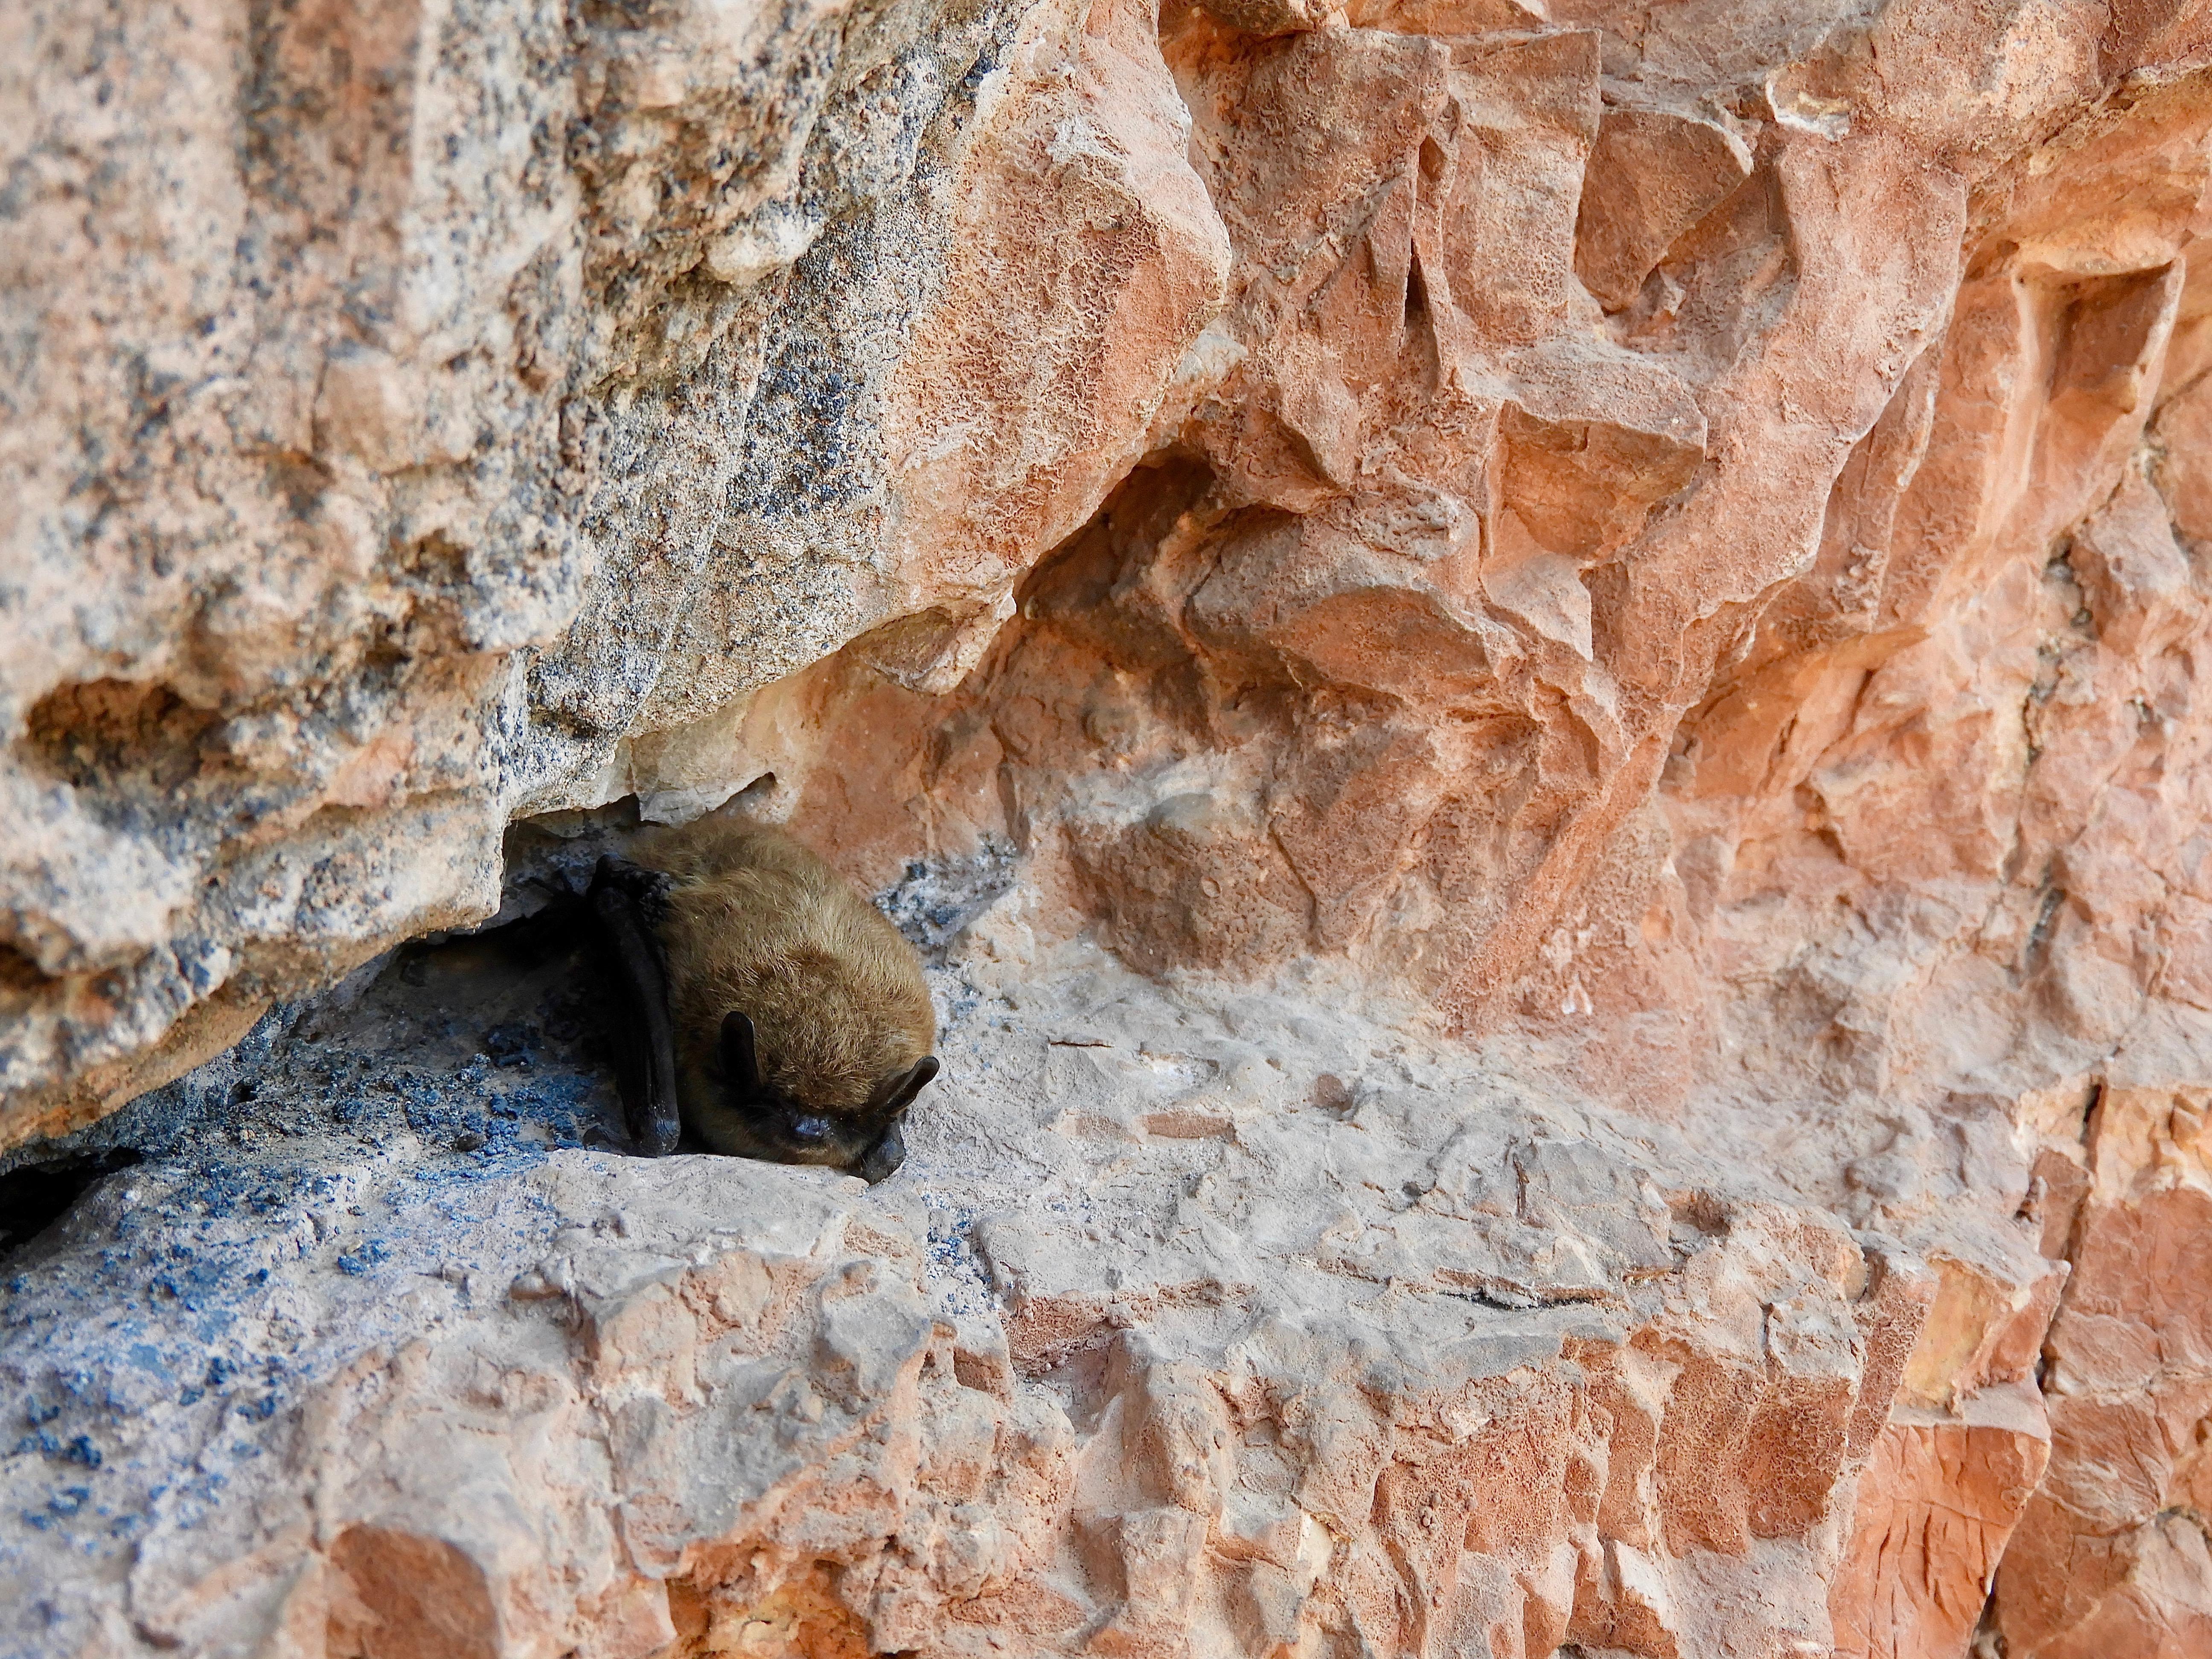 A small brown bat rests on a red-orange colored rock.